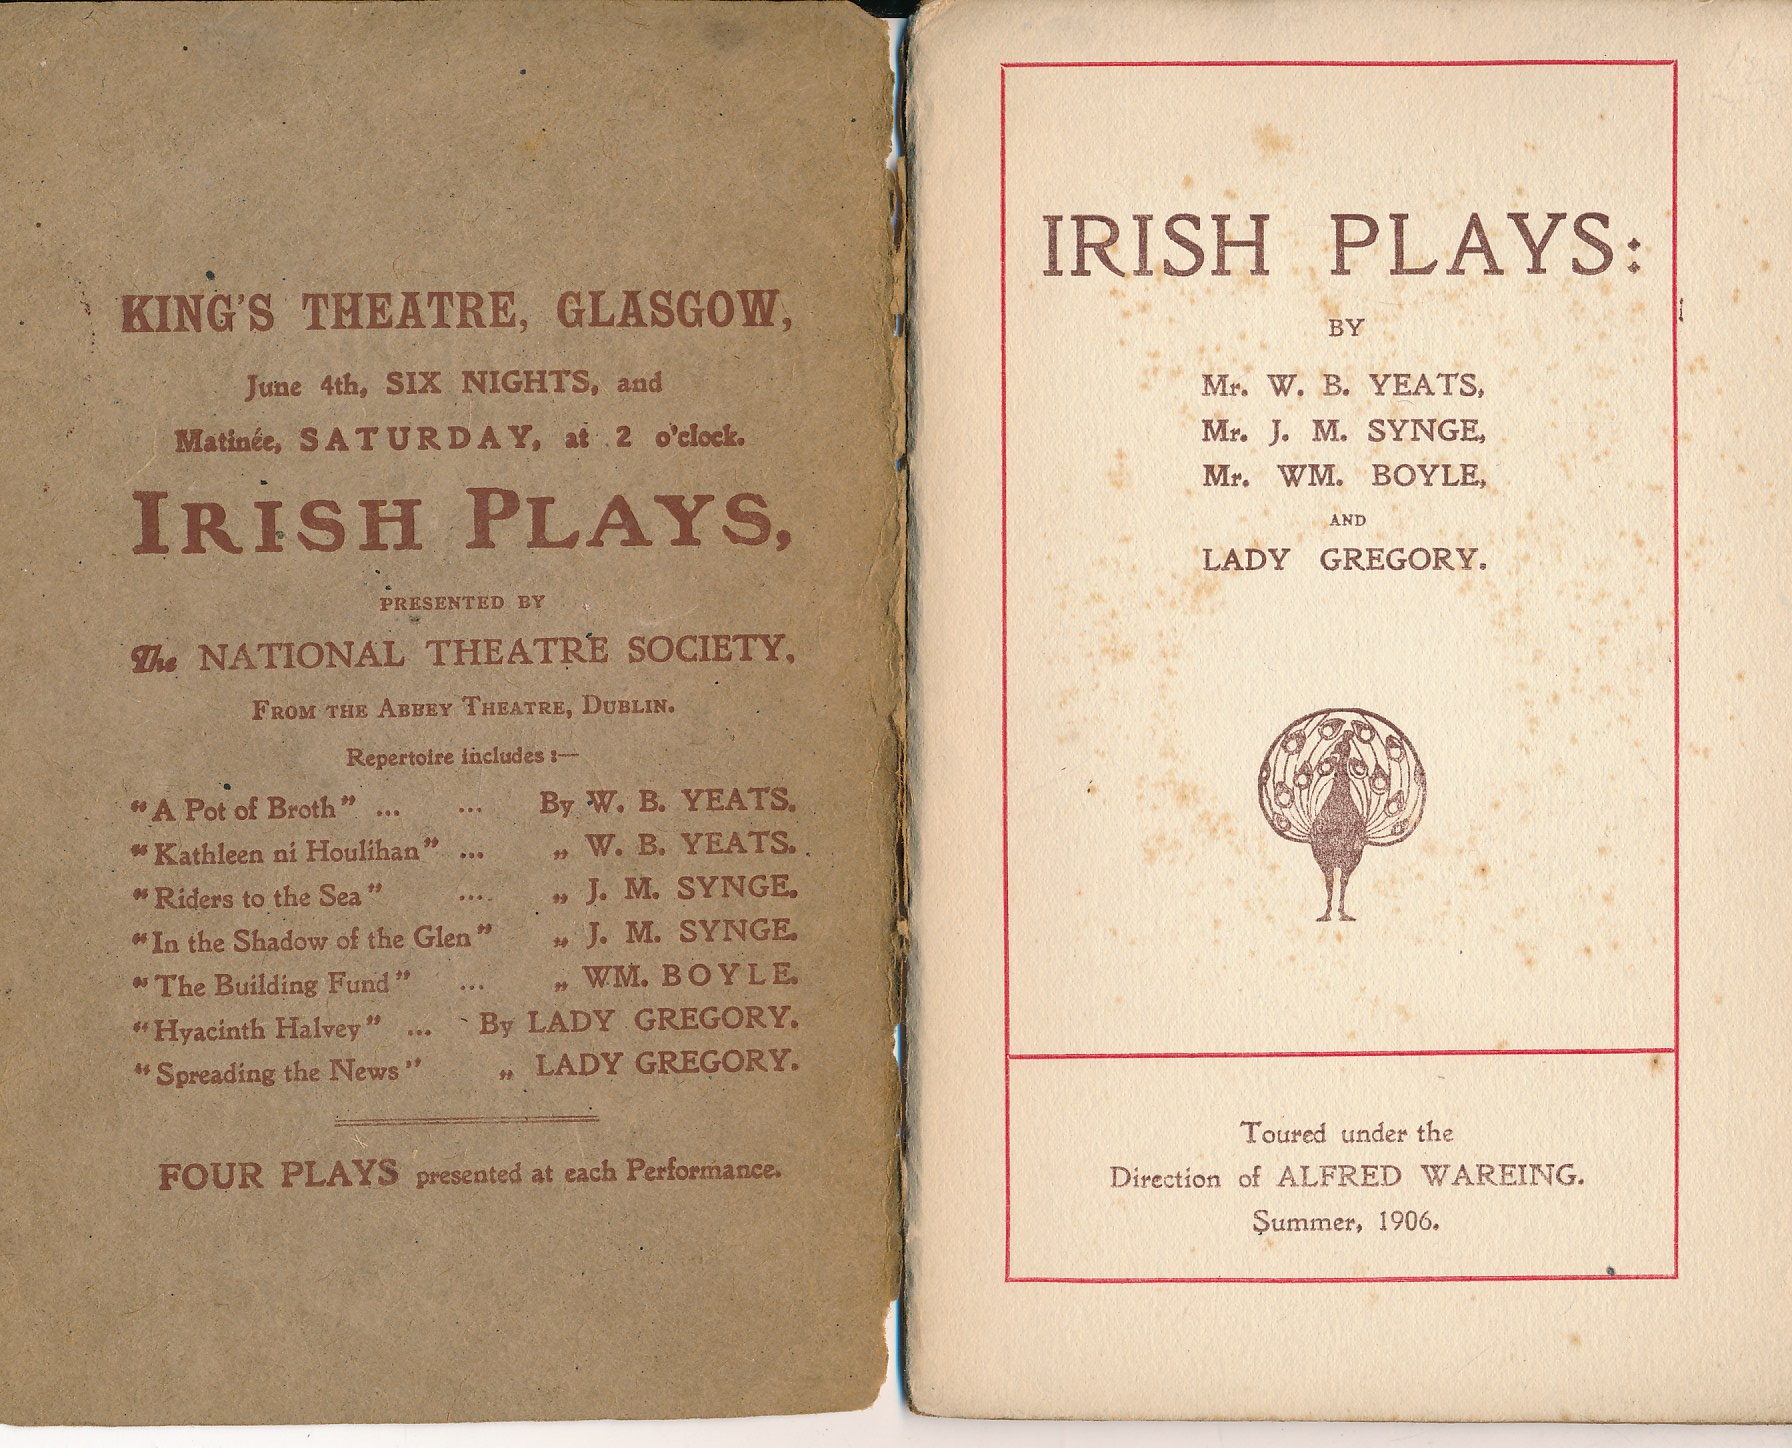 Irish Plays. Toured under the direction of Alfred Wareing.